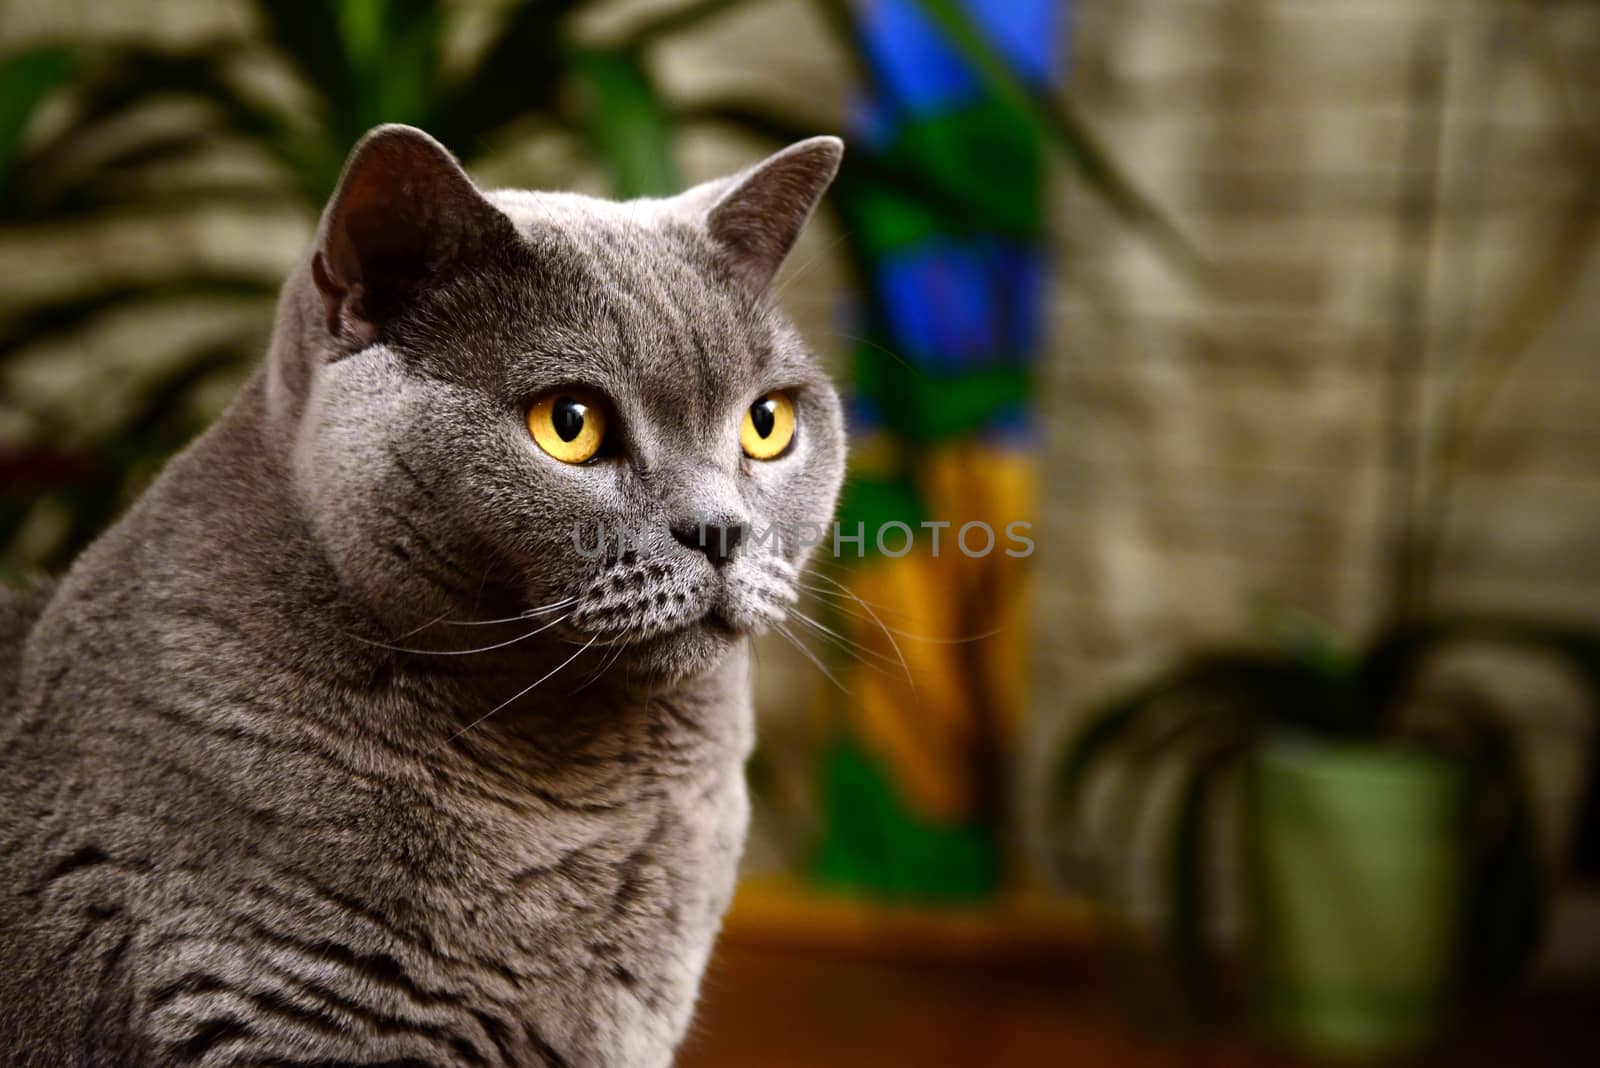 Portrait photo of a british blue cat with amber eyes. Taken in Germany.